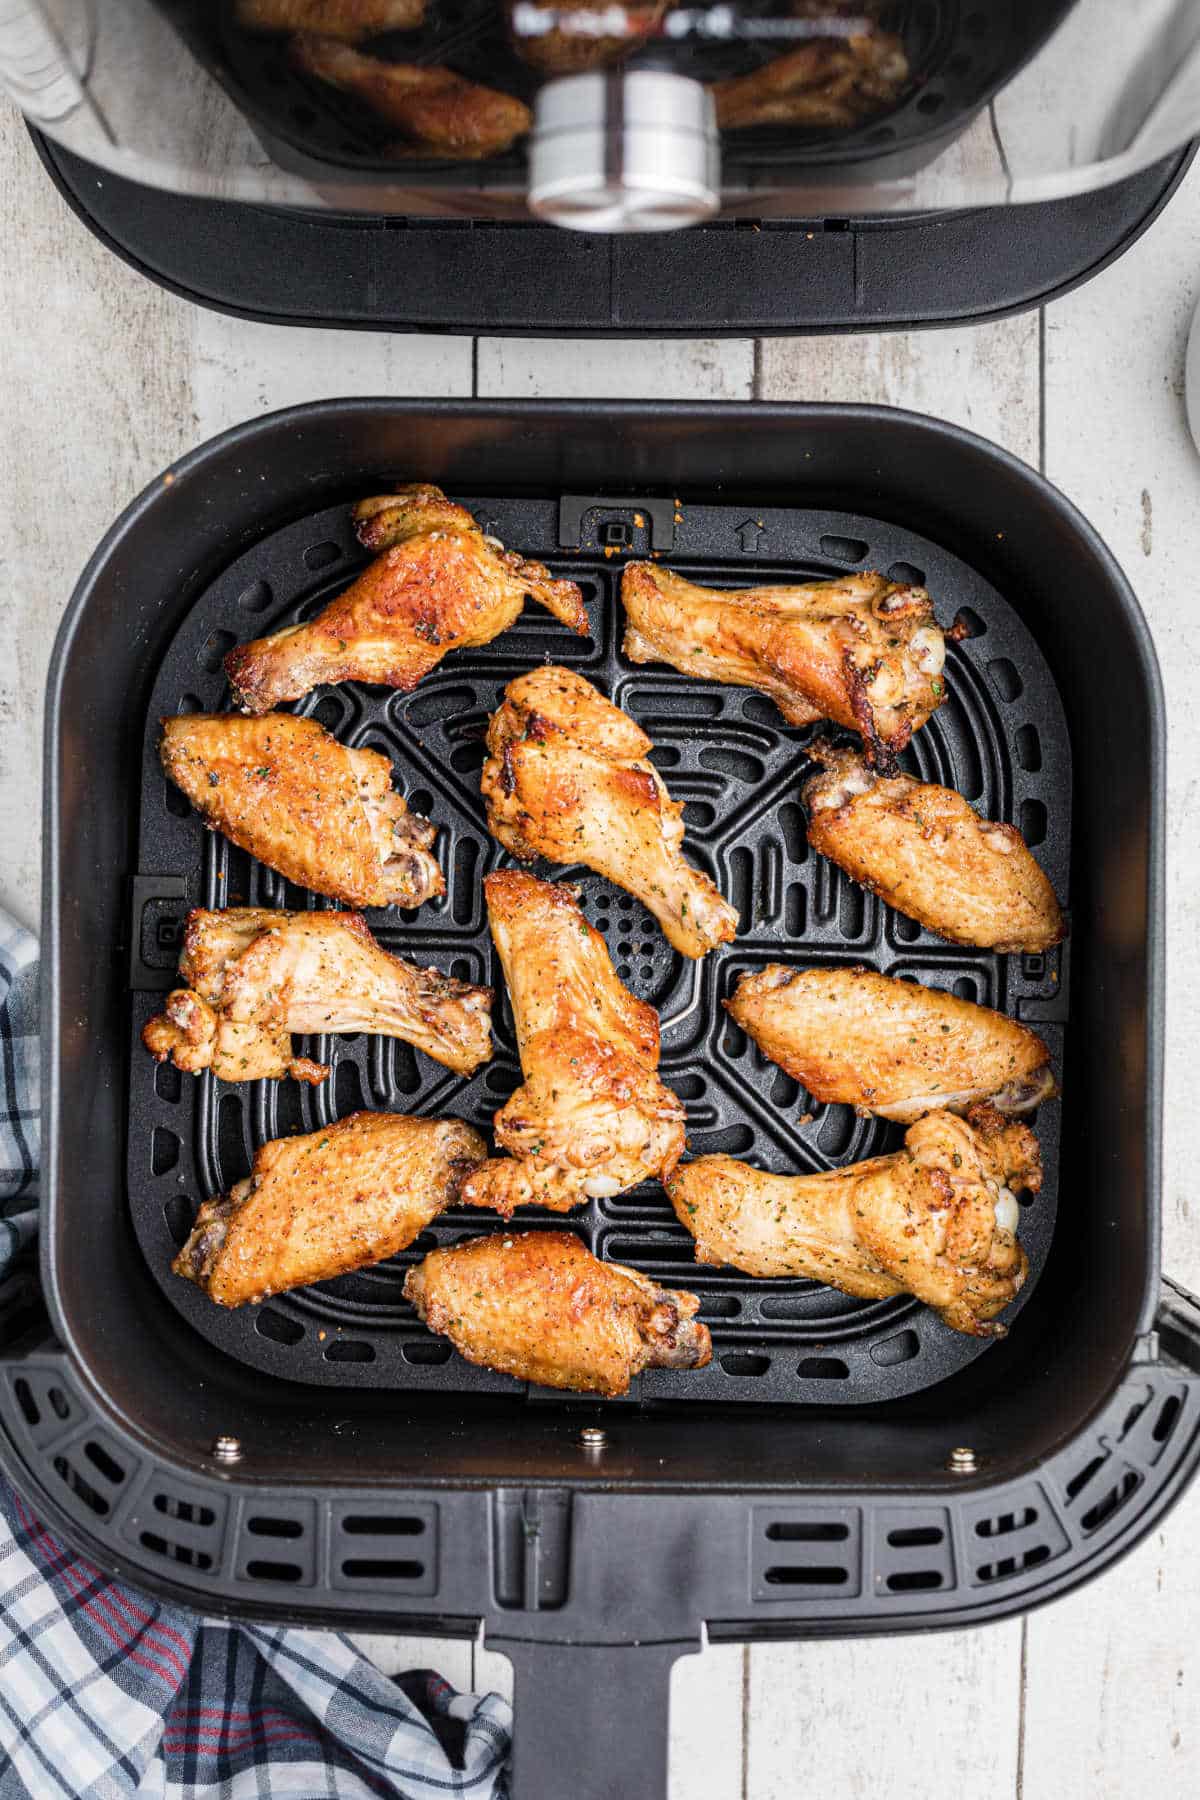 An air fryer basket with some ranch chicken wings cooked inside.